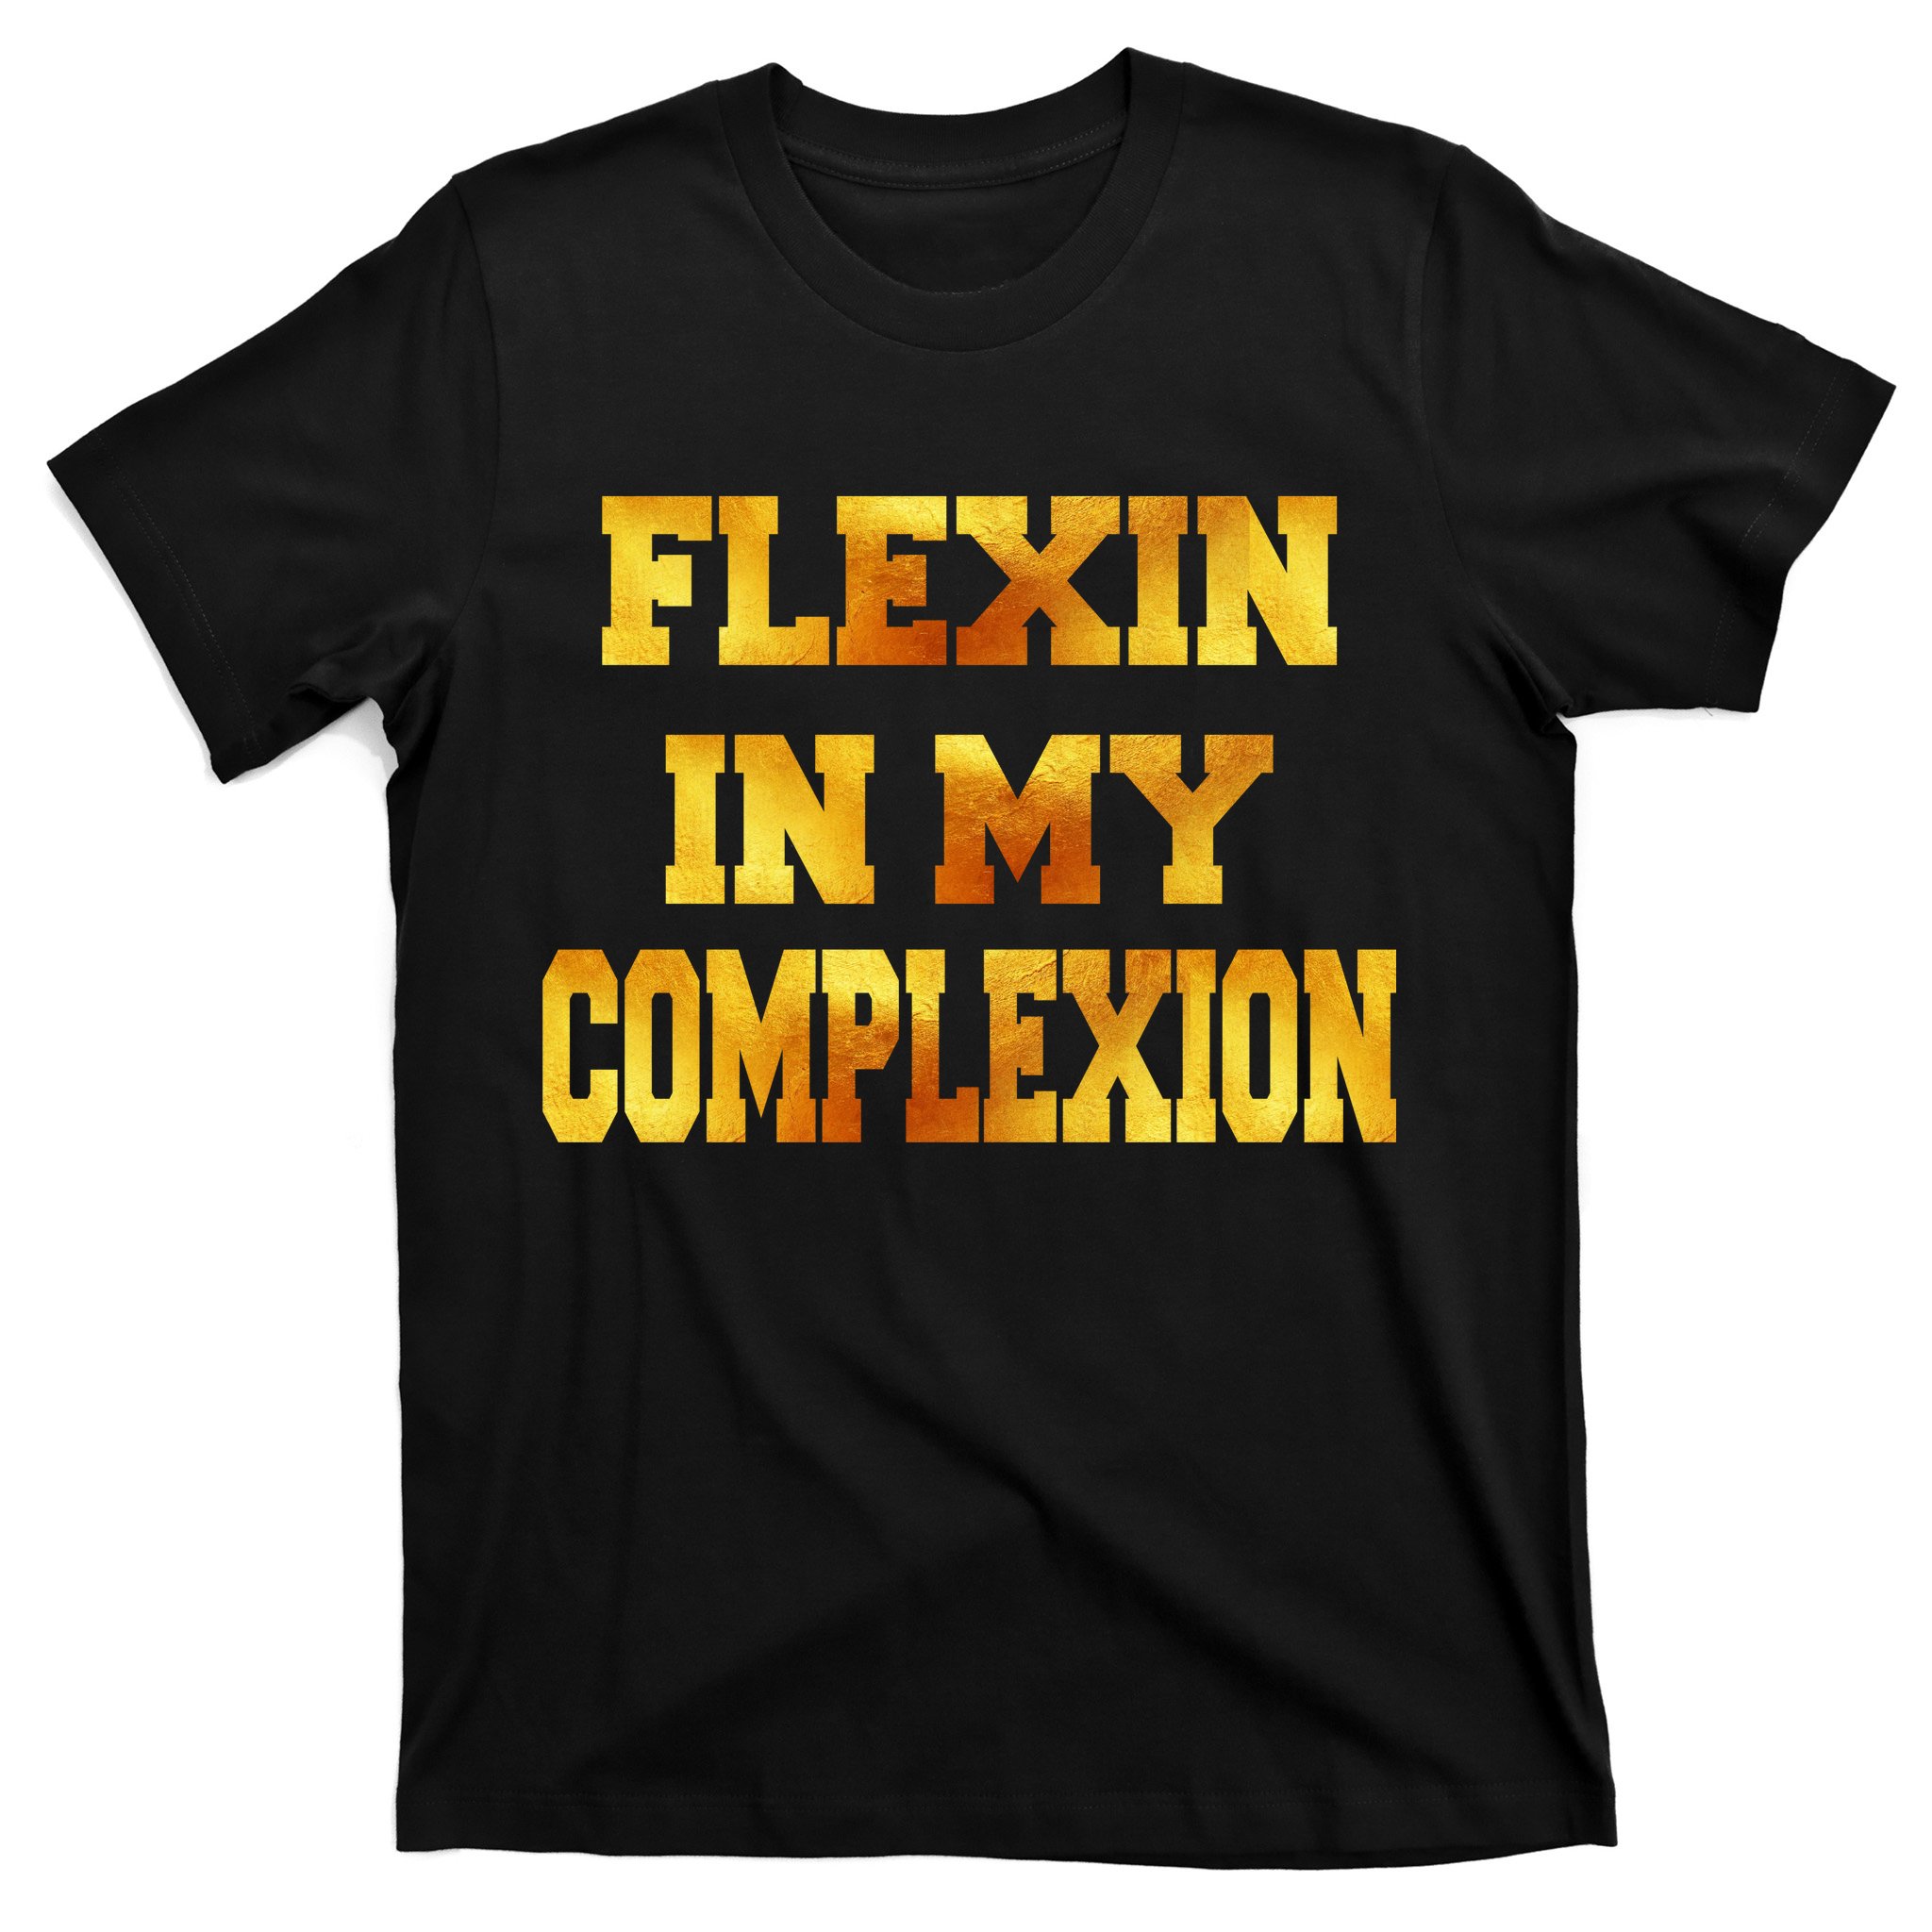 Flexin In My Complexion Gold Print T Shirt Teeshirtpalace 5573